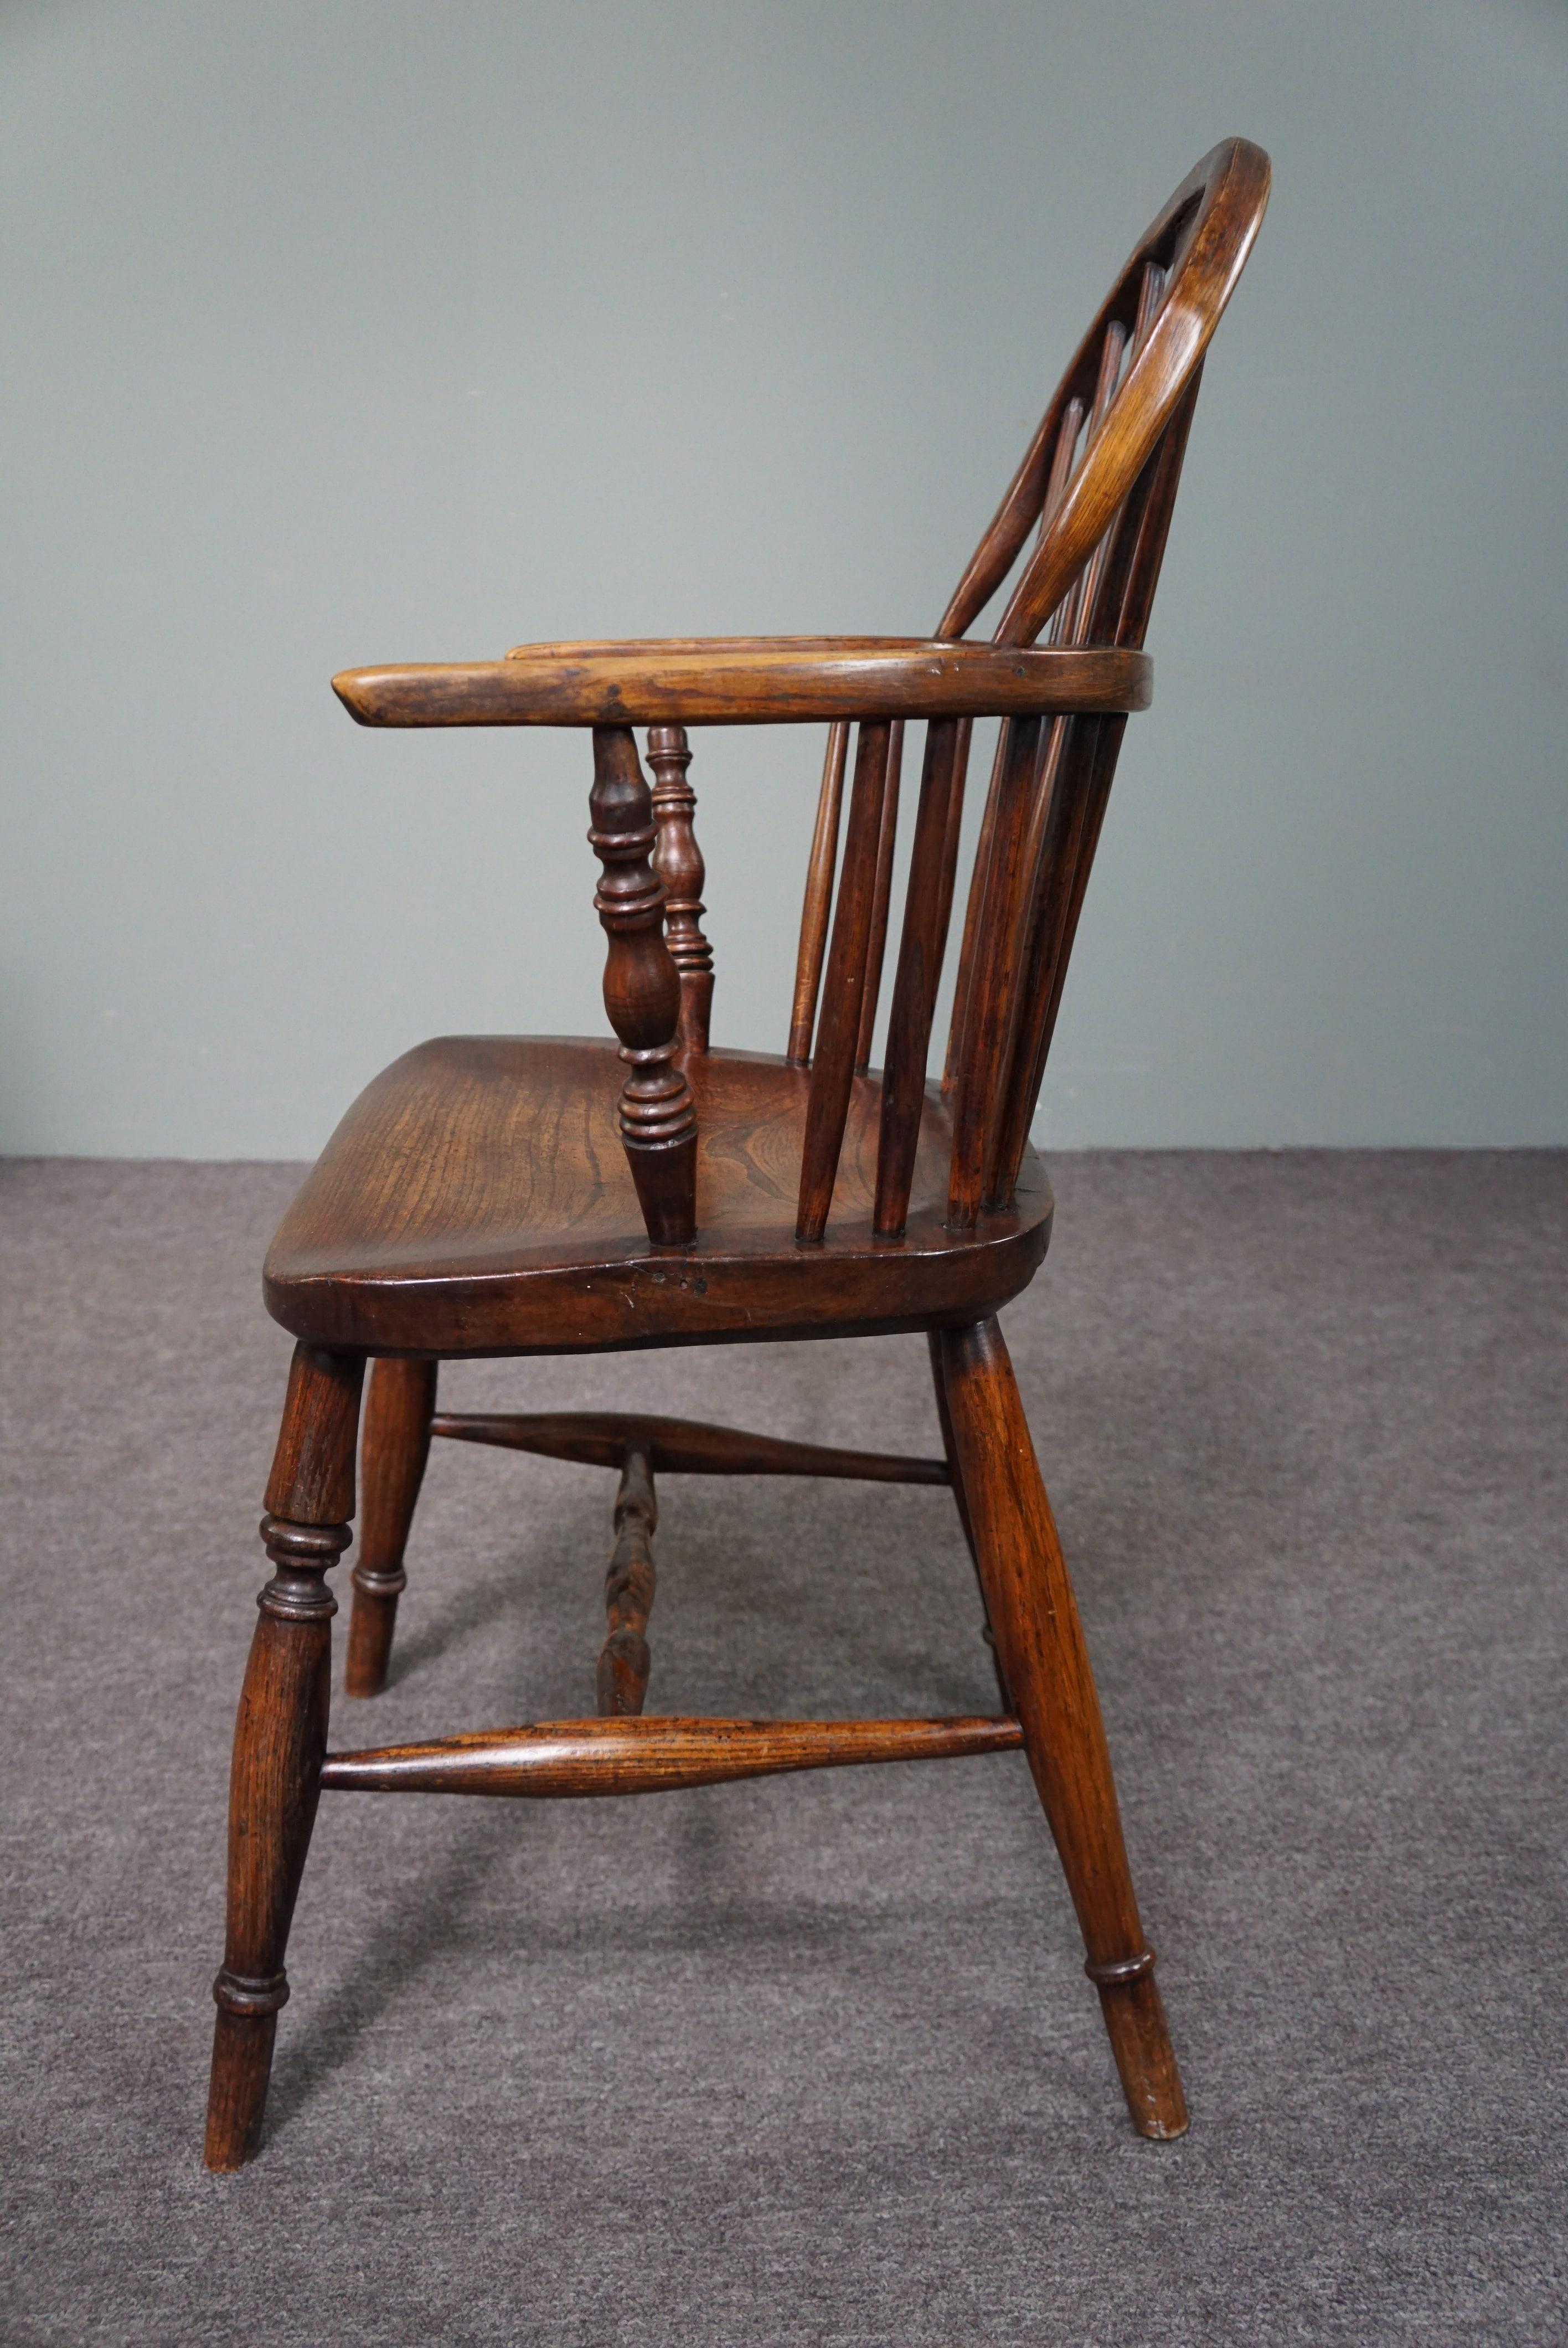 Wood Antique English Low Back Windsor chair/armchair, 18th century For Sale